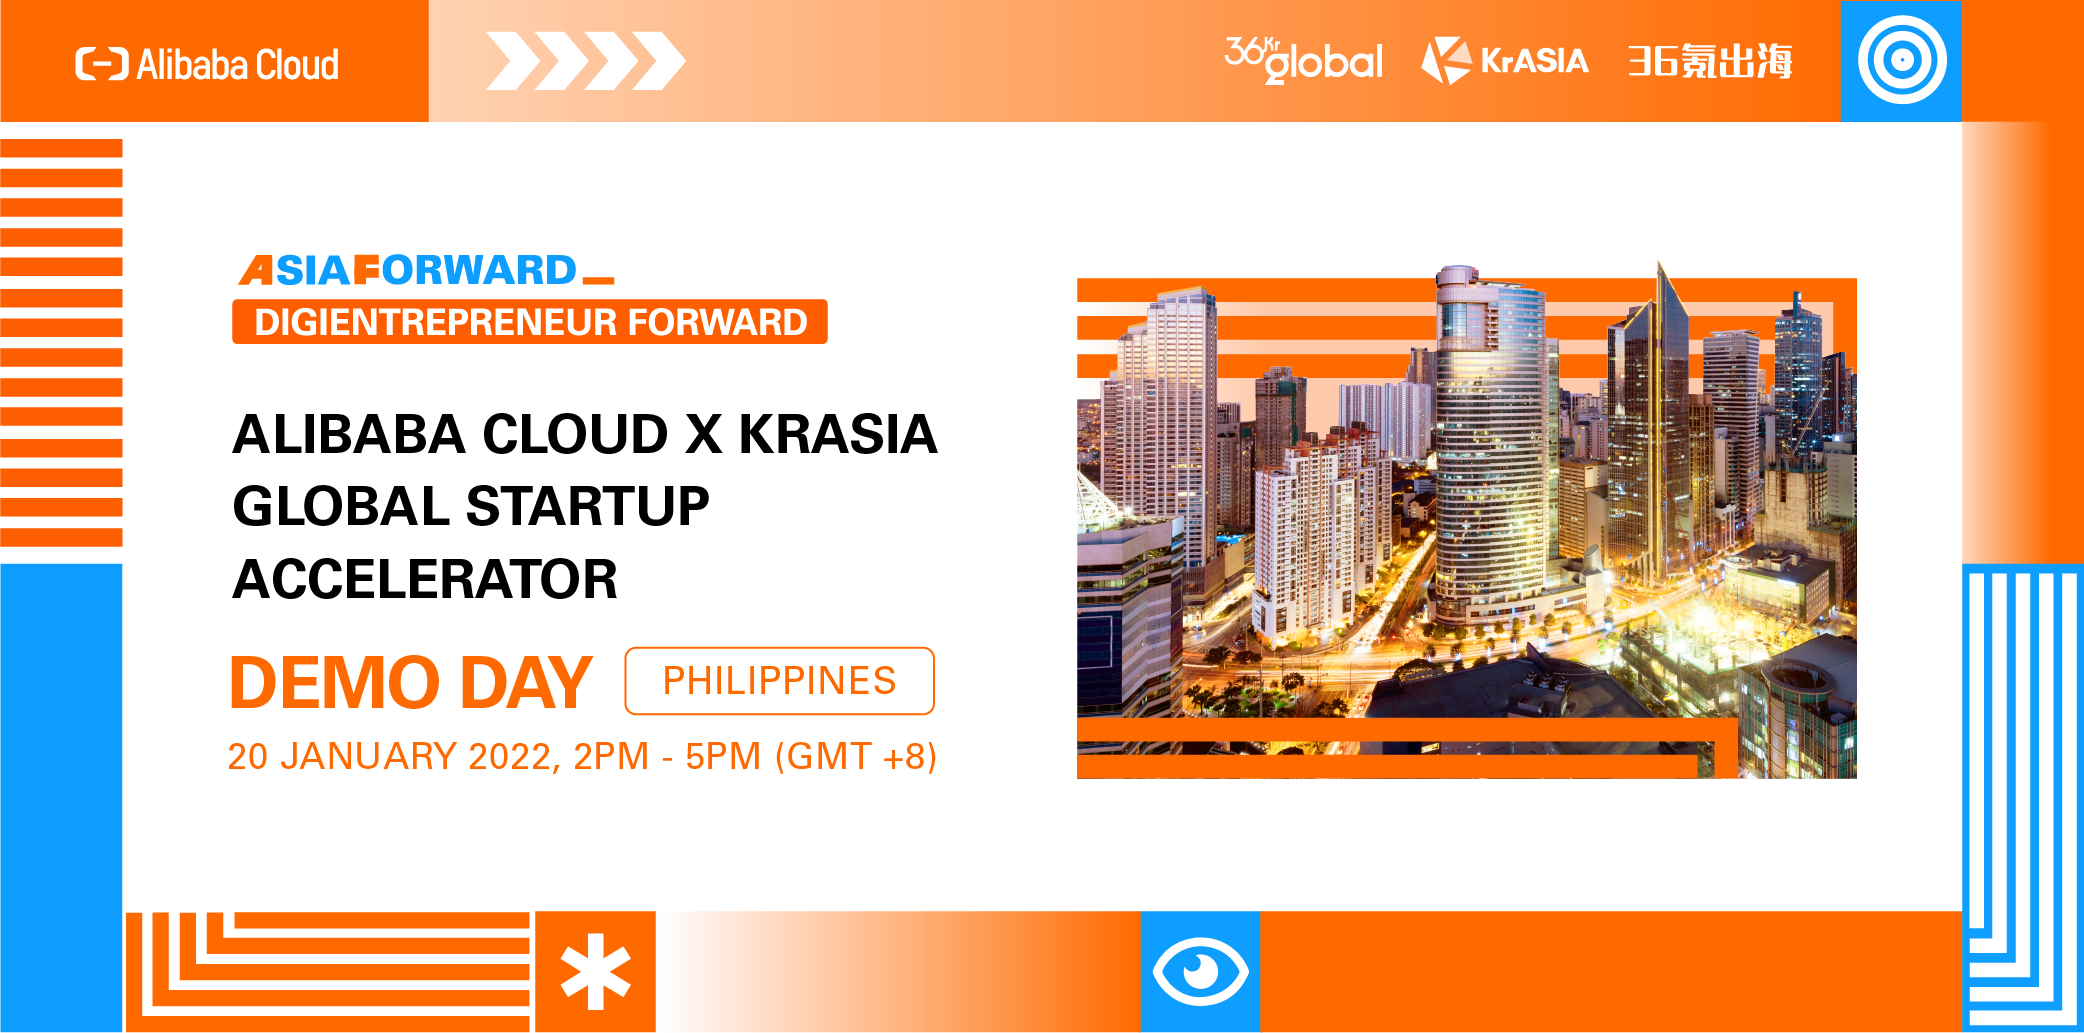 Registration opens for the Alibaba Cloud x KrASIA Global Startup Accelerator Philippines Demo Day